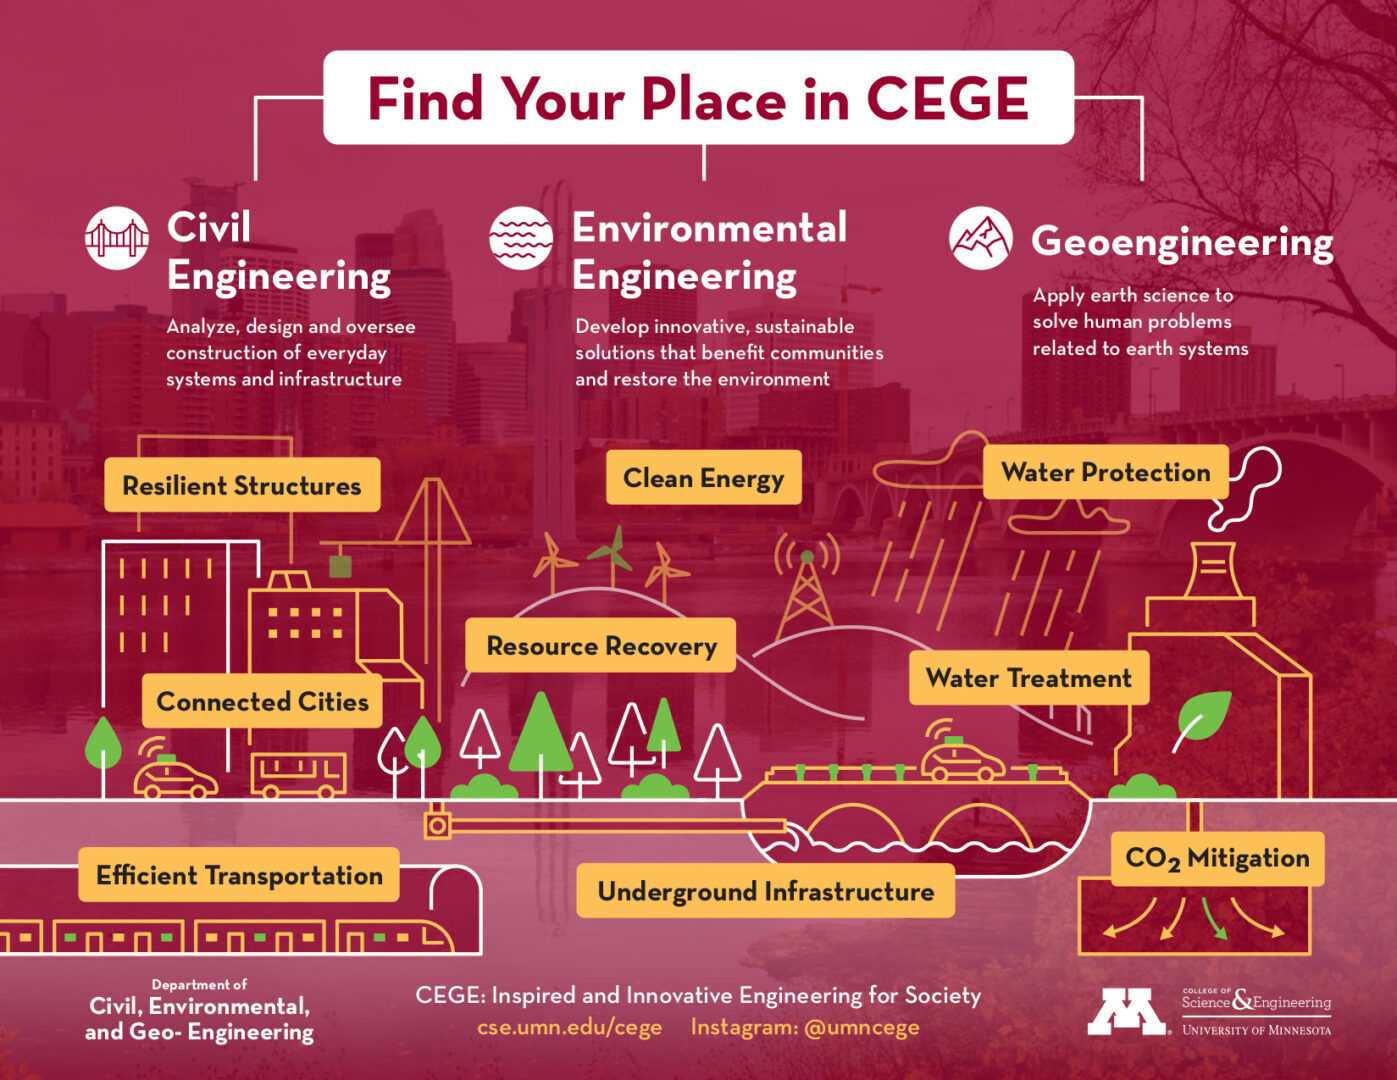 Infographic titled Find Your Place in CEGE that describes the three majors within the department